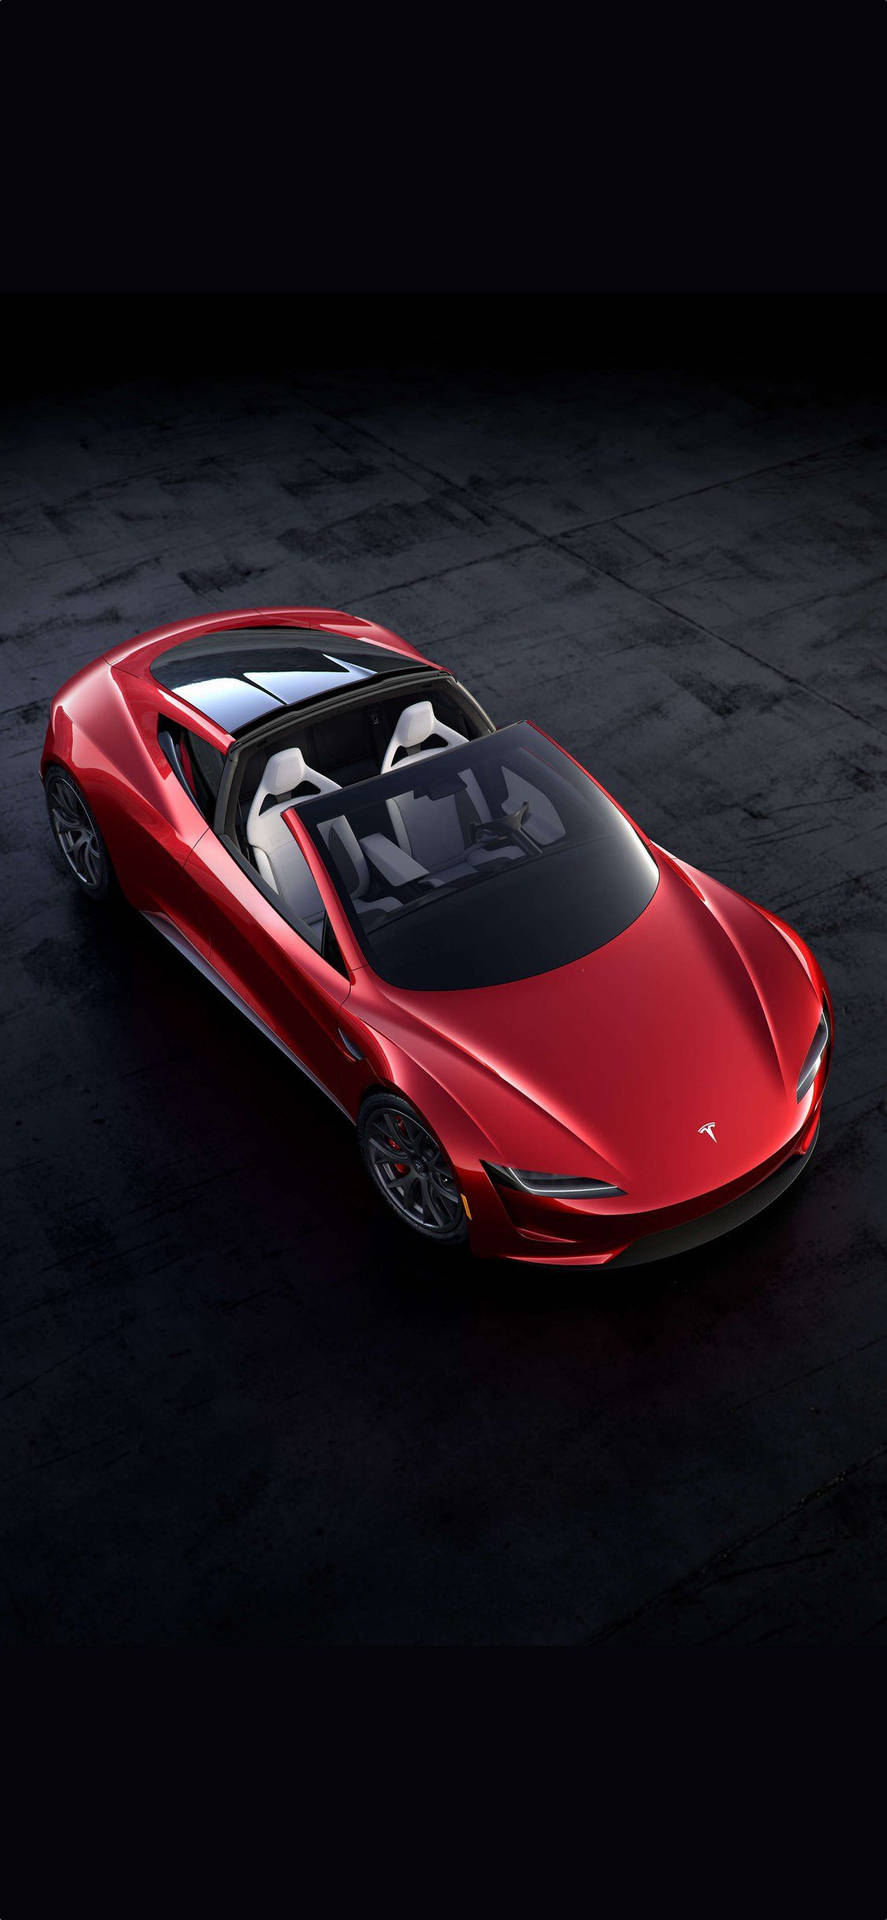 Iphone X Car Red Tesla Roadster Background